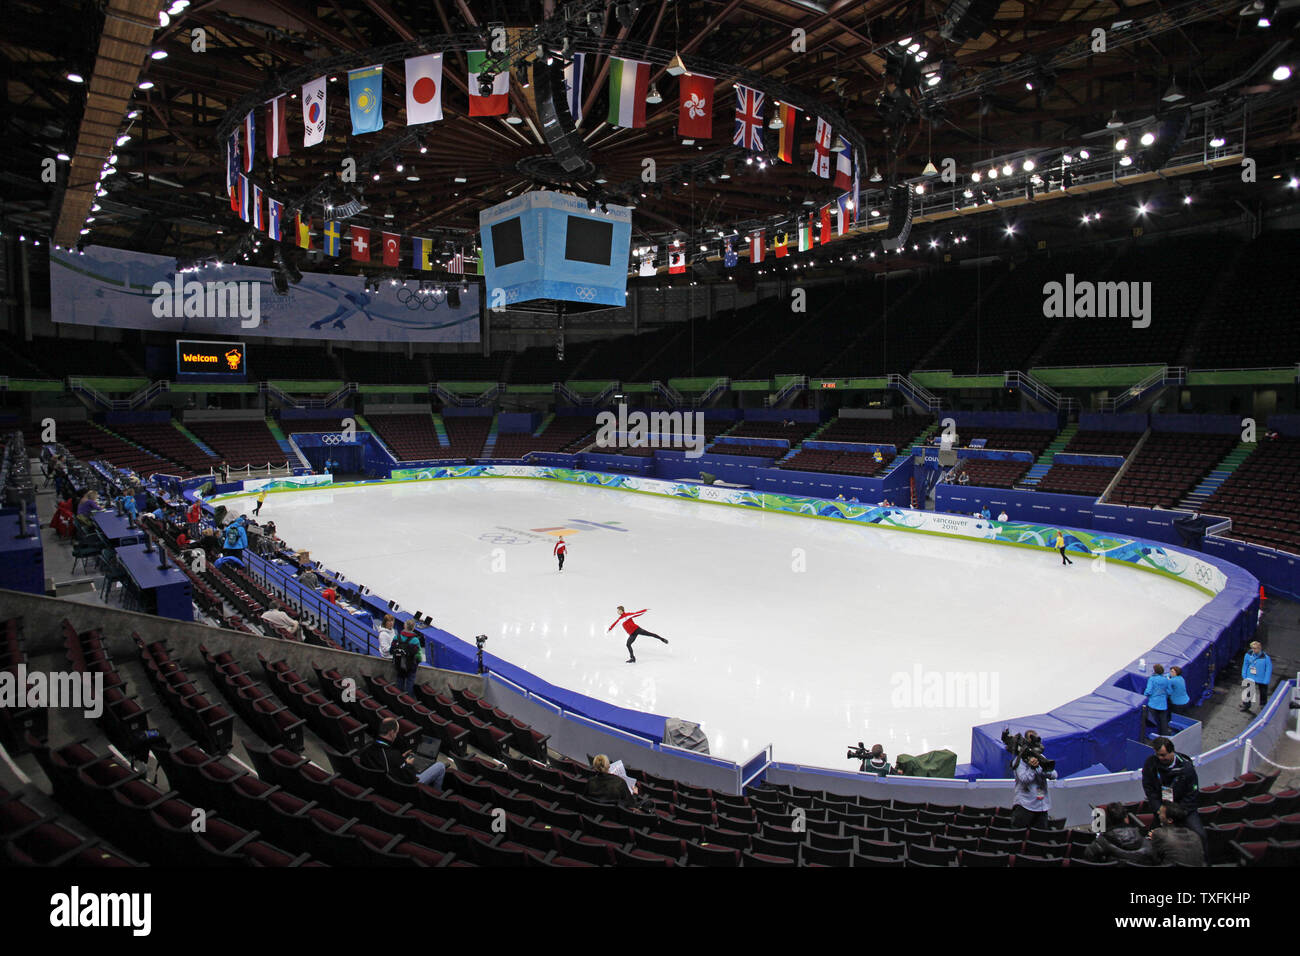 Figure skaters practice at the Pacific Coliseum at the 2010 Winter Olympics in Vancouver, Canada on February 11, 2010.     UPI/Brian Kersey Stock Photo